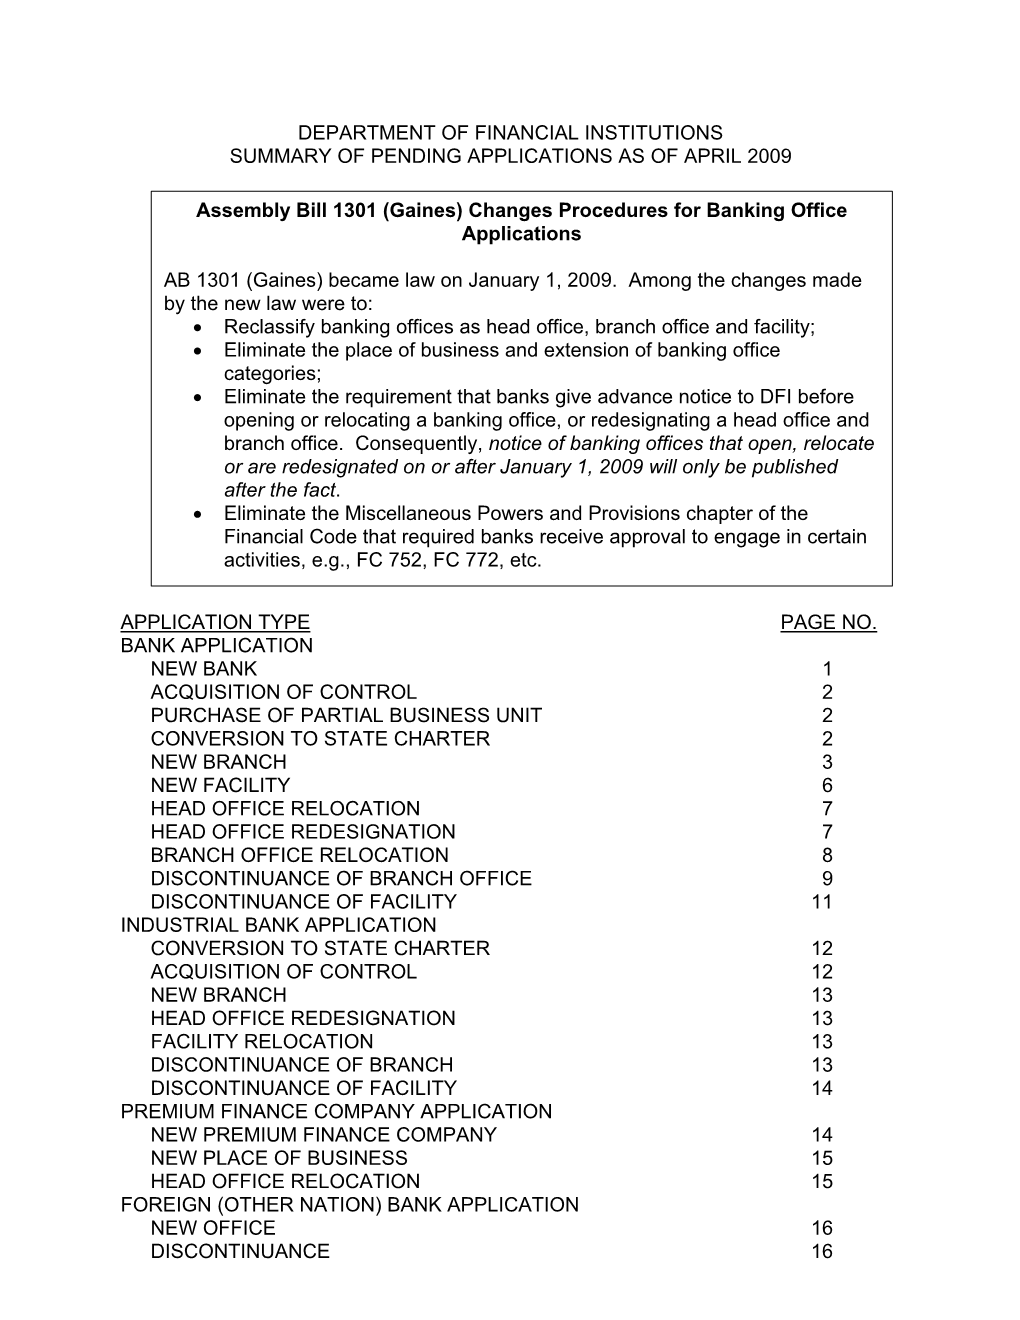 Department of Financial Institutions Summary of Pending Applications As of April 2009